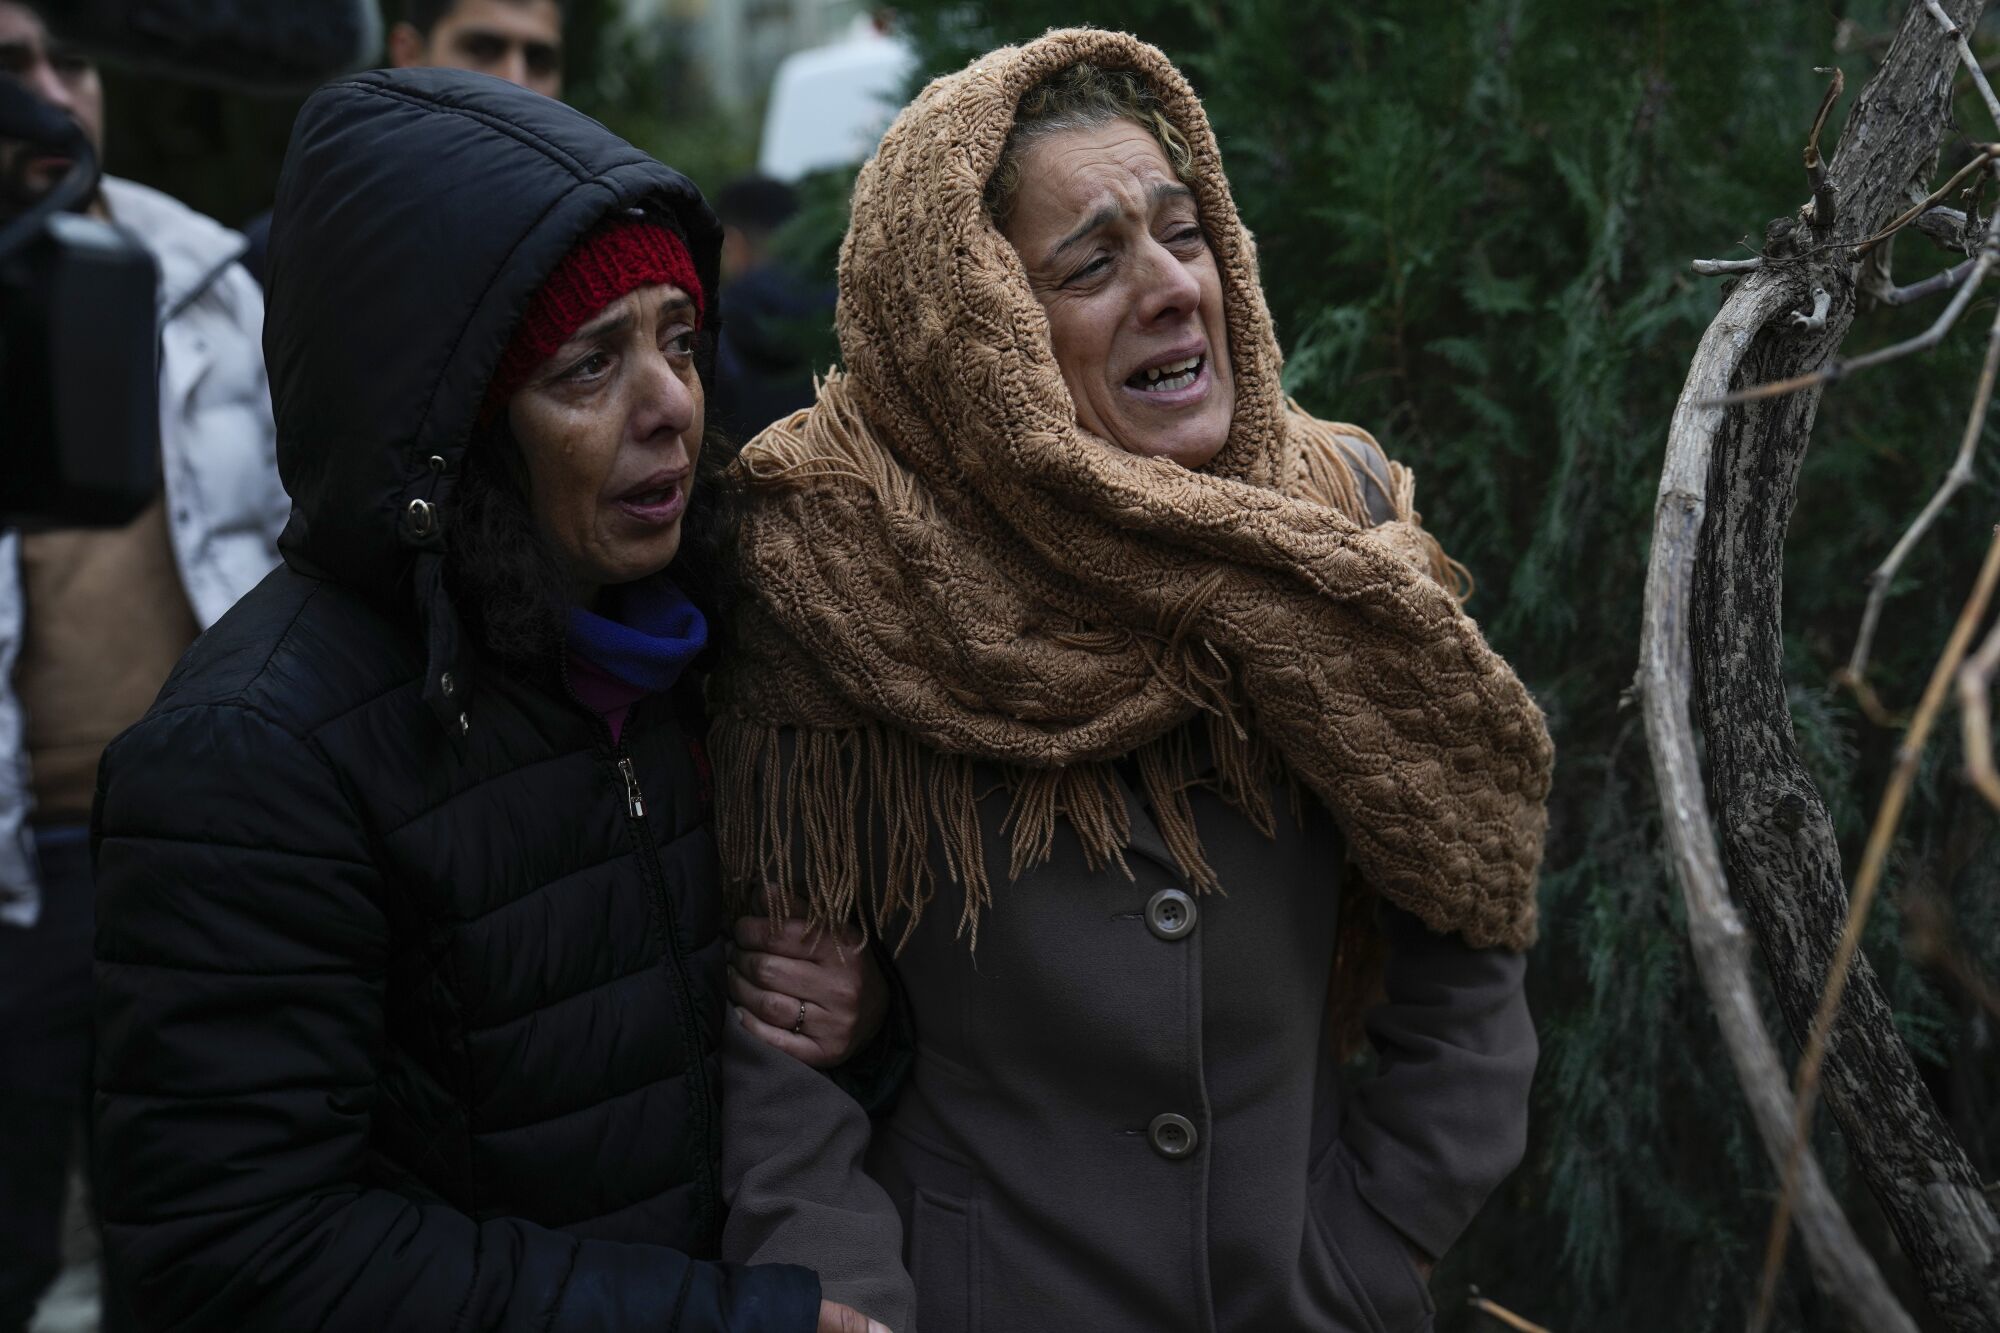 Women cry as they watch while the emergency teams search for people in the rubble of a destroyed building in Adana, Turkey.